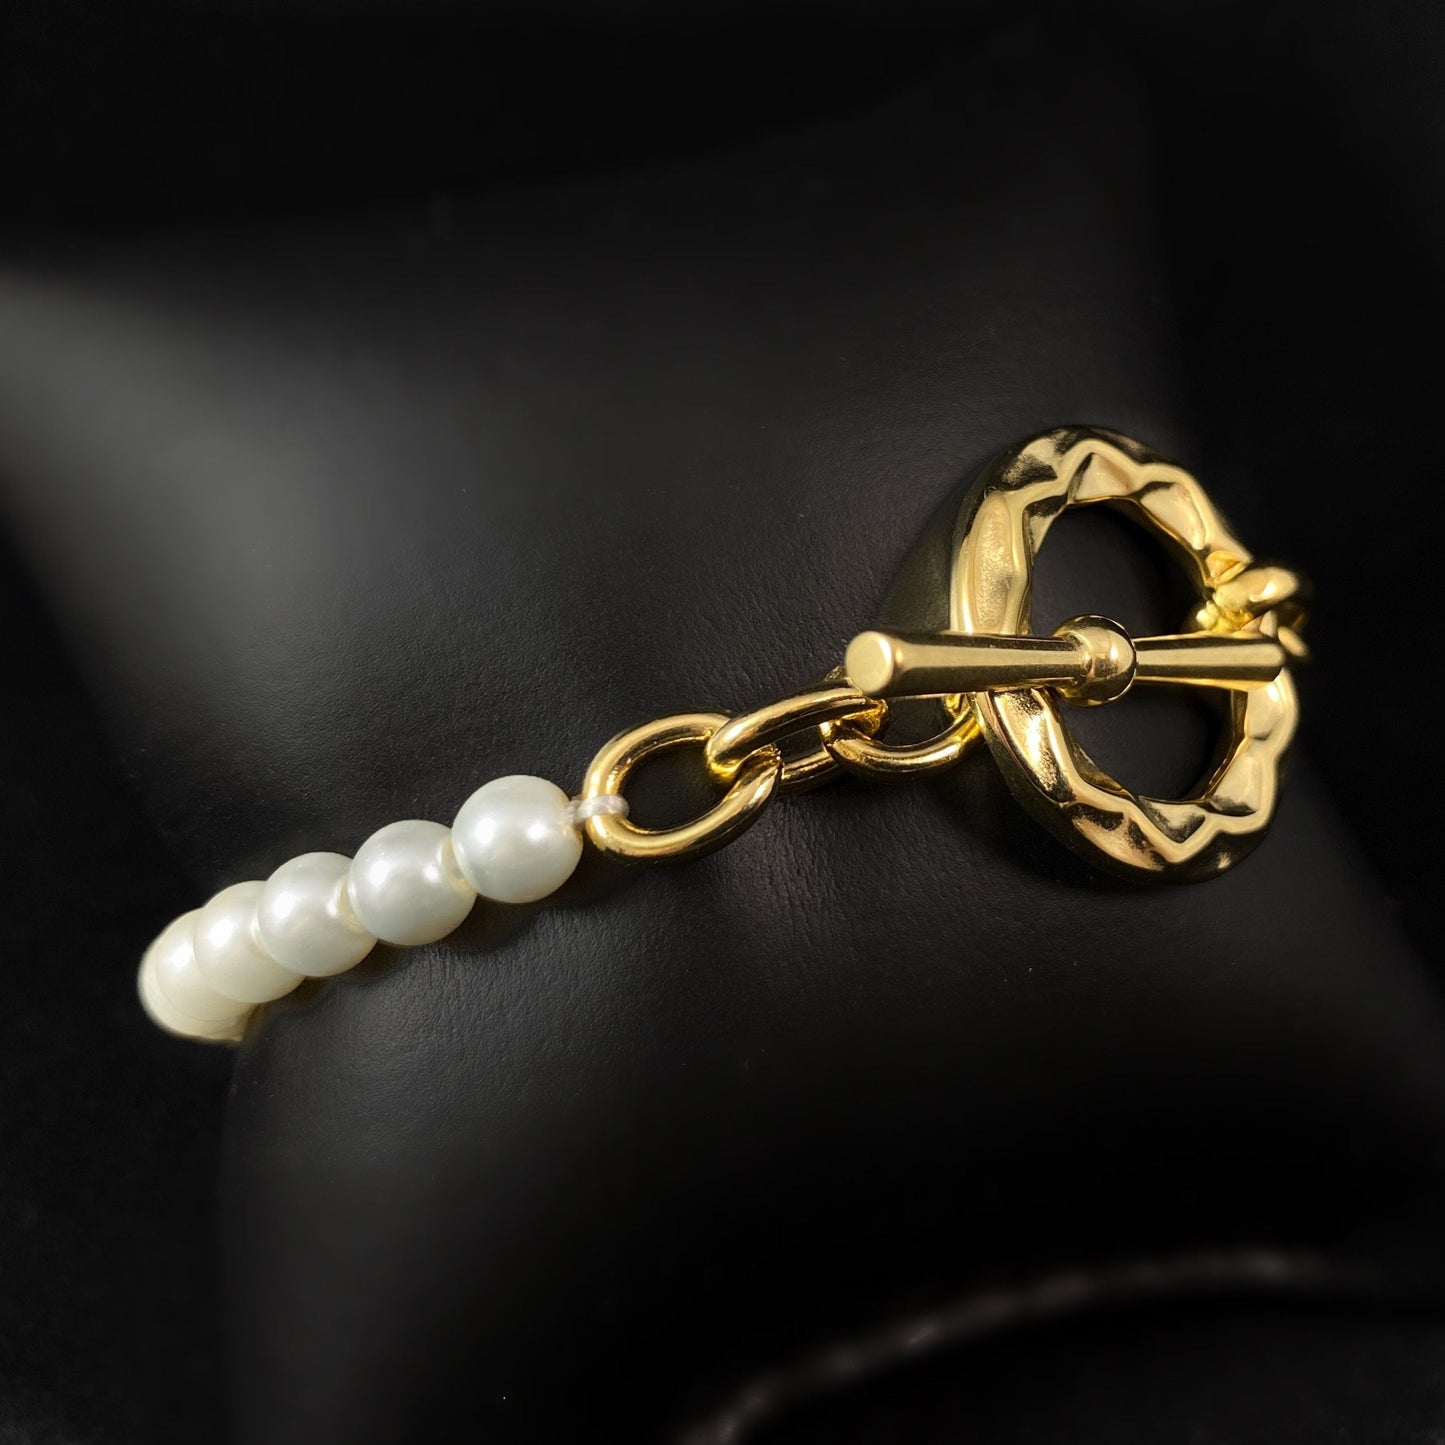 White Pearl Bracelet with Chunky Gold Chain and Decorative Sunburst Toggle Clasp